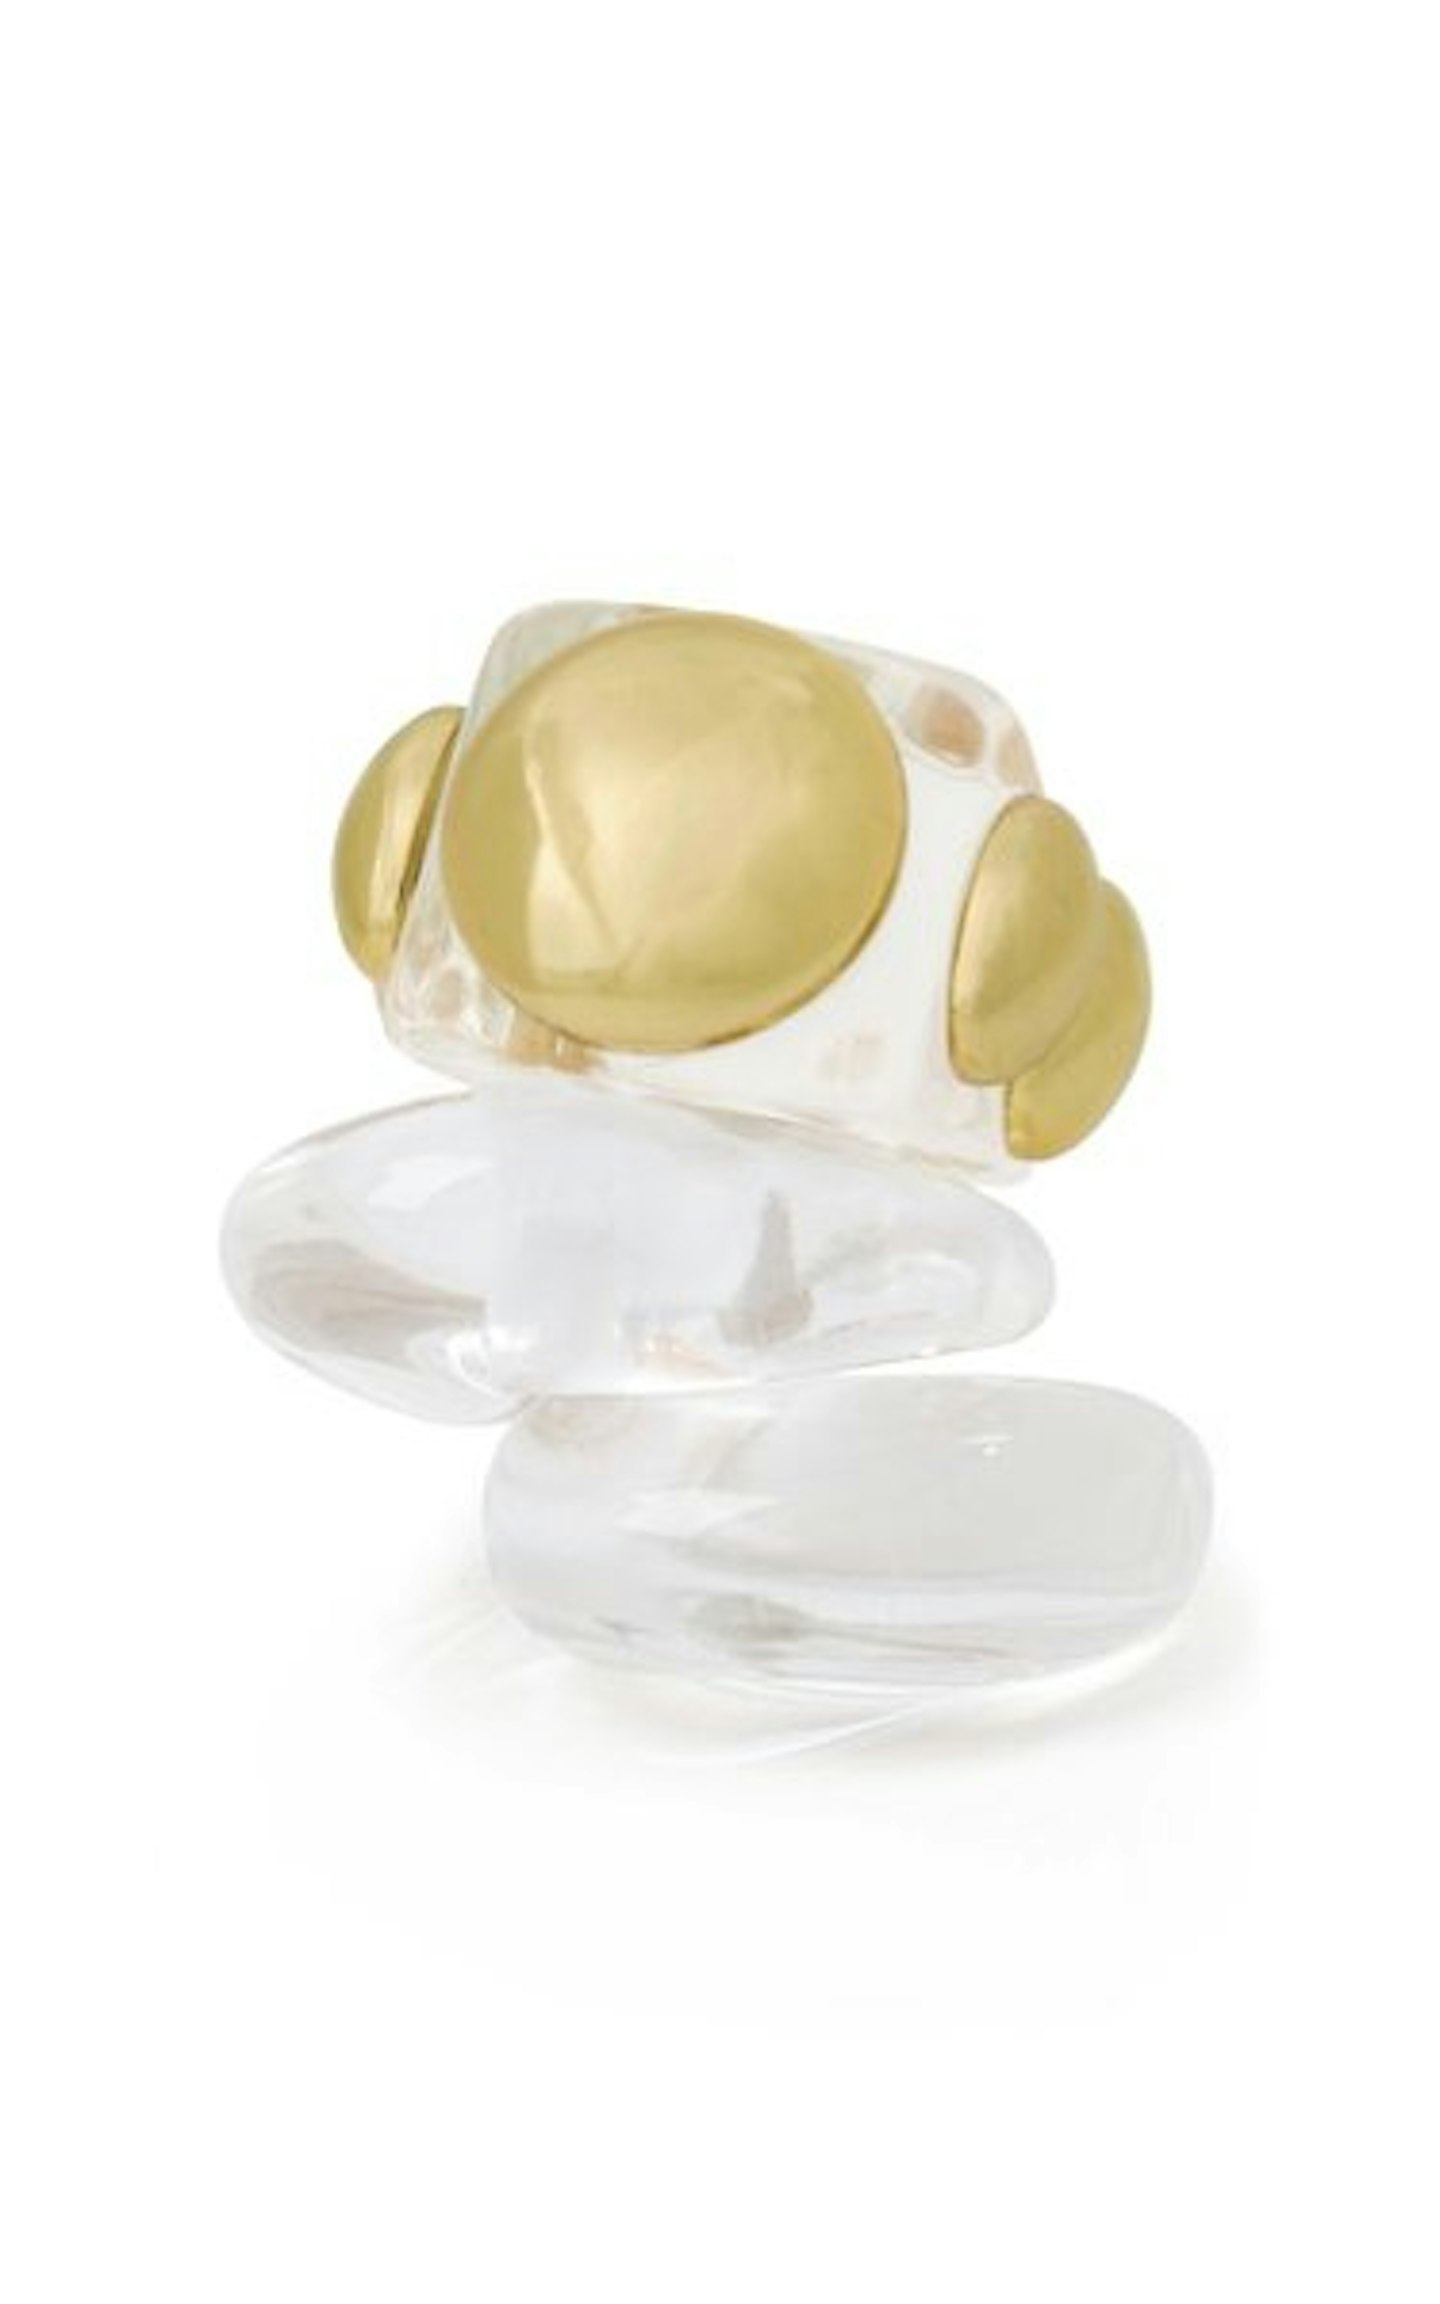 La Manso, Invisible Resin Ring Set, £122.00